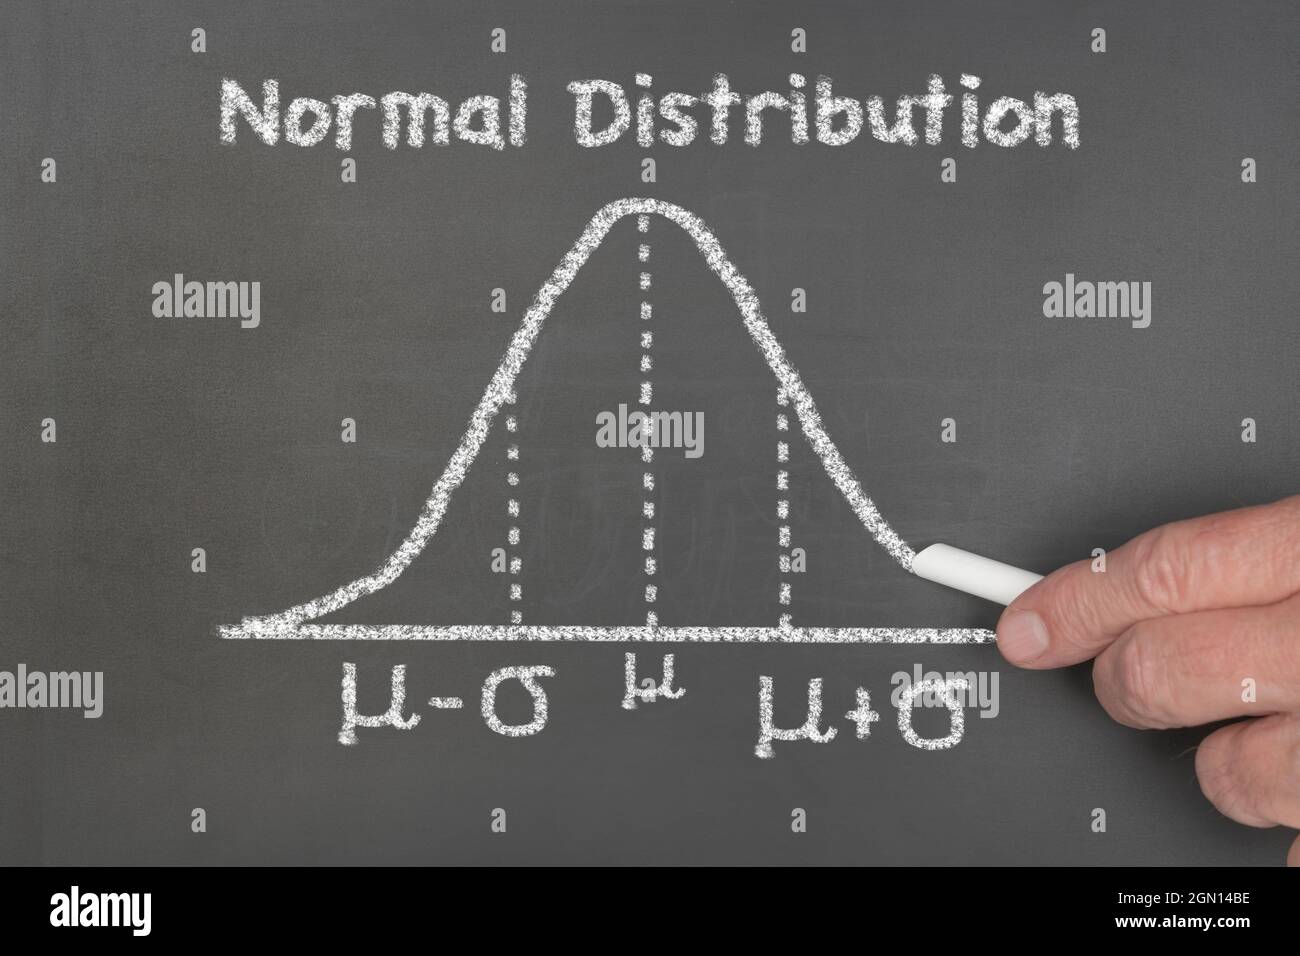 A teacher explains to students the principles of a normal distribution in the area of probability distribution. Stock Photo